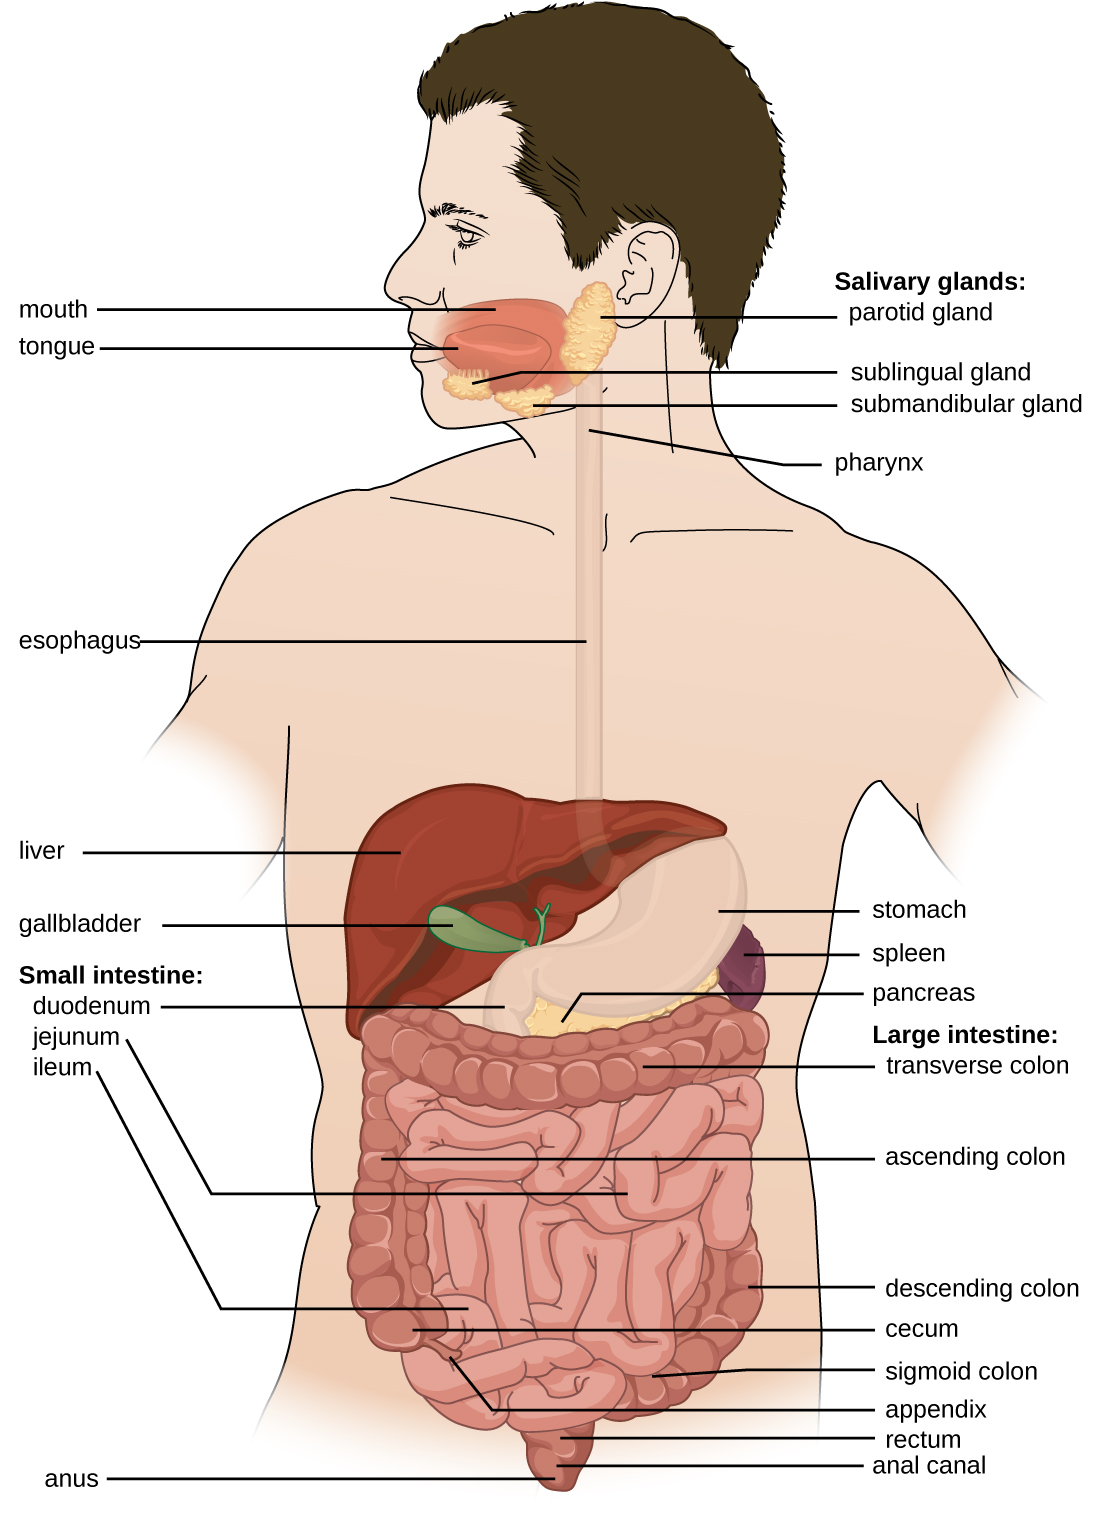 Diagram of the digestive system. The system begins with the mouth and tongue. There are salivary glands in this region: the sublingual gland is under the tongue, the submandibular gland is below the jaw and the parotid gland is in the very back of the mouth. The mouth leads to the pharynx (a tube) that leads to the esophagus, that leads to the stomach, that leads to the small intestines. The small intestine is divided into 3 regions: first is the duodenum, next is the jejunim and finally the ileum. This leads to the large intestines which is divided into  regions: first the cecum, then the ascending colon, then the transverse colon, then the descending colon, then the sigmoid colon, and finally the rectum, anal canal and anus.  The appendix is a small projection off the cecum. Also part of the digestive system is the large liver (above and to the right of the stomach), the gallbladder (a small sac under the liver), the pancrease (a structure below and behind the stomach) and the spleen (a structure below and to the left of the stomach).